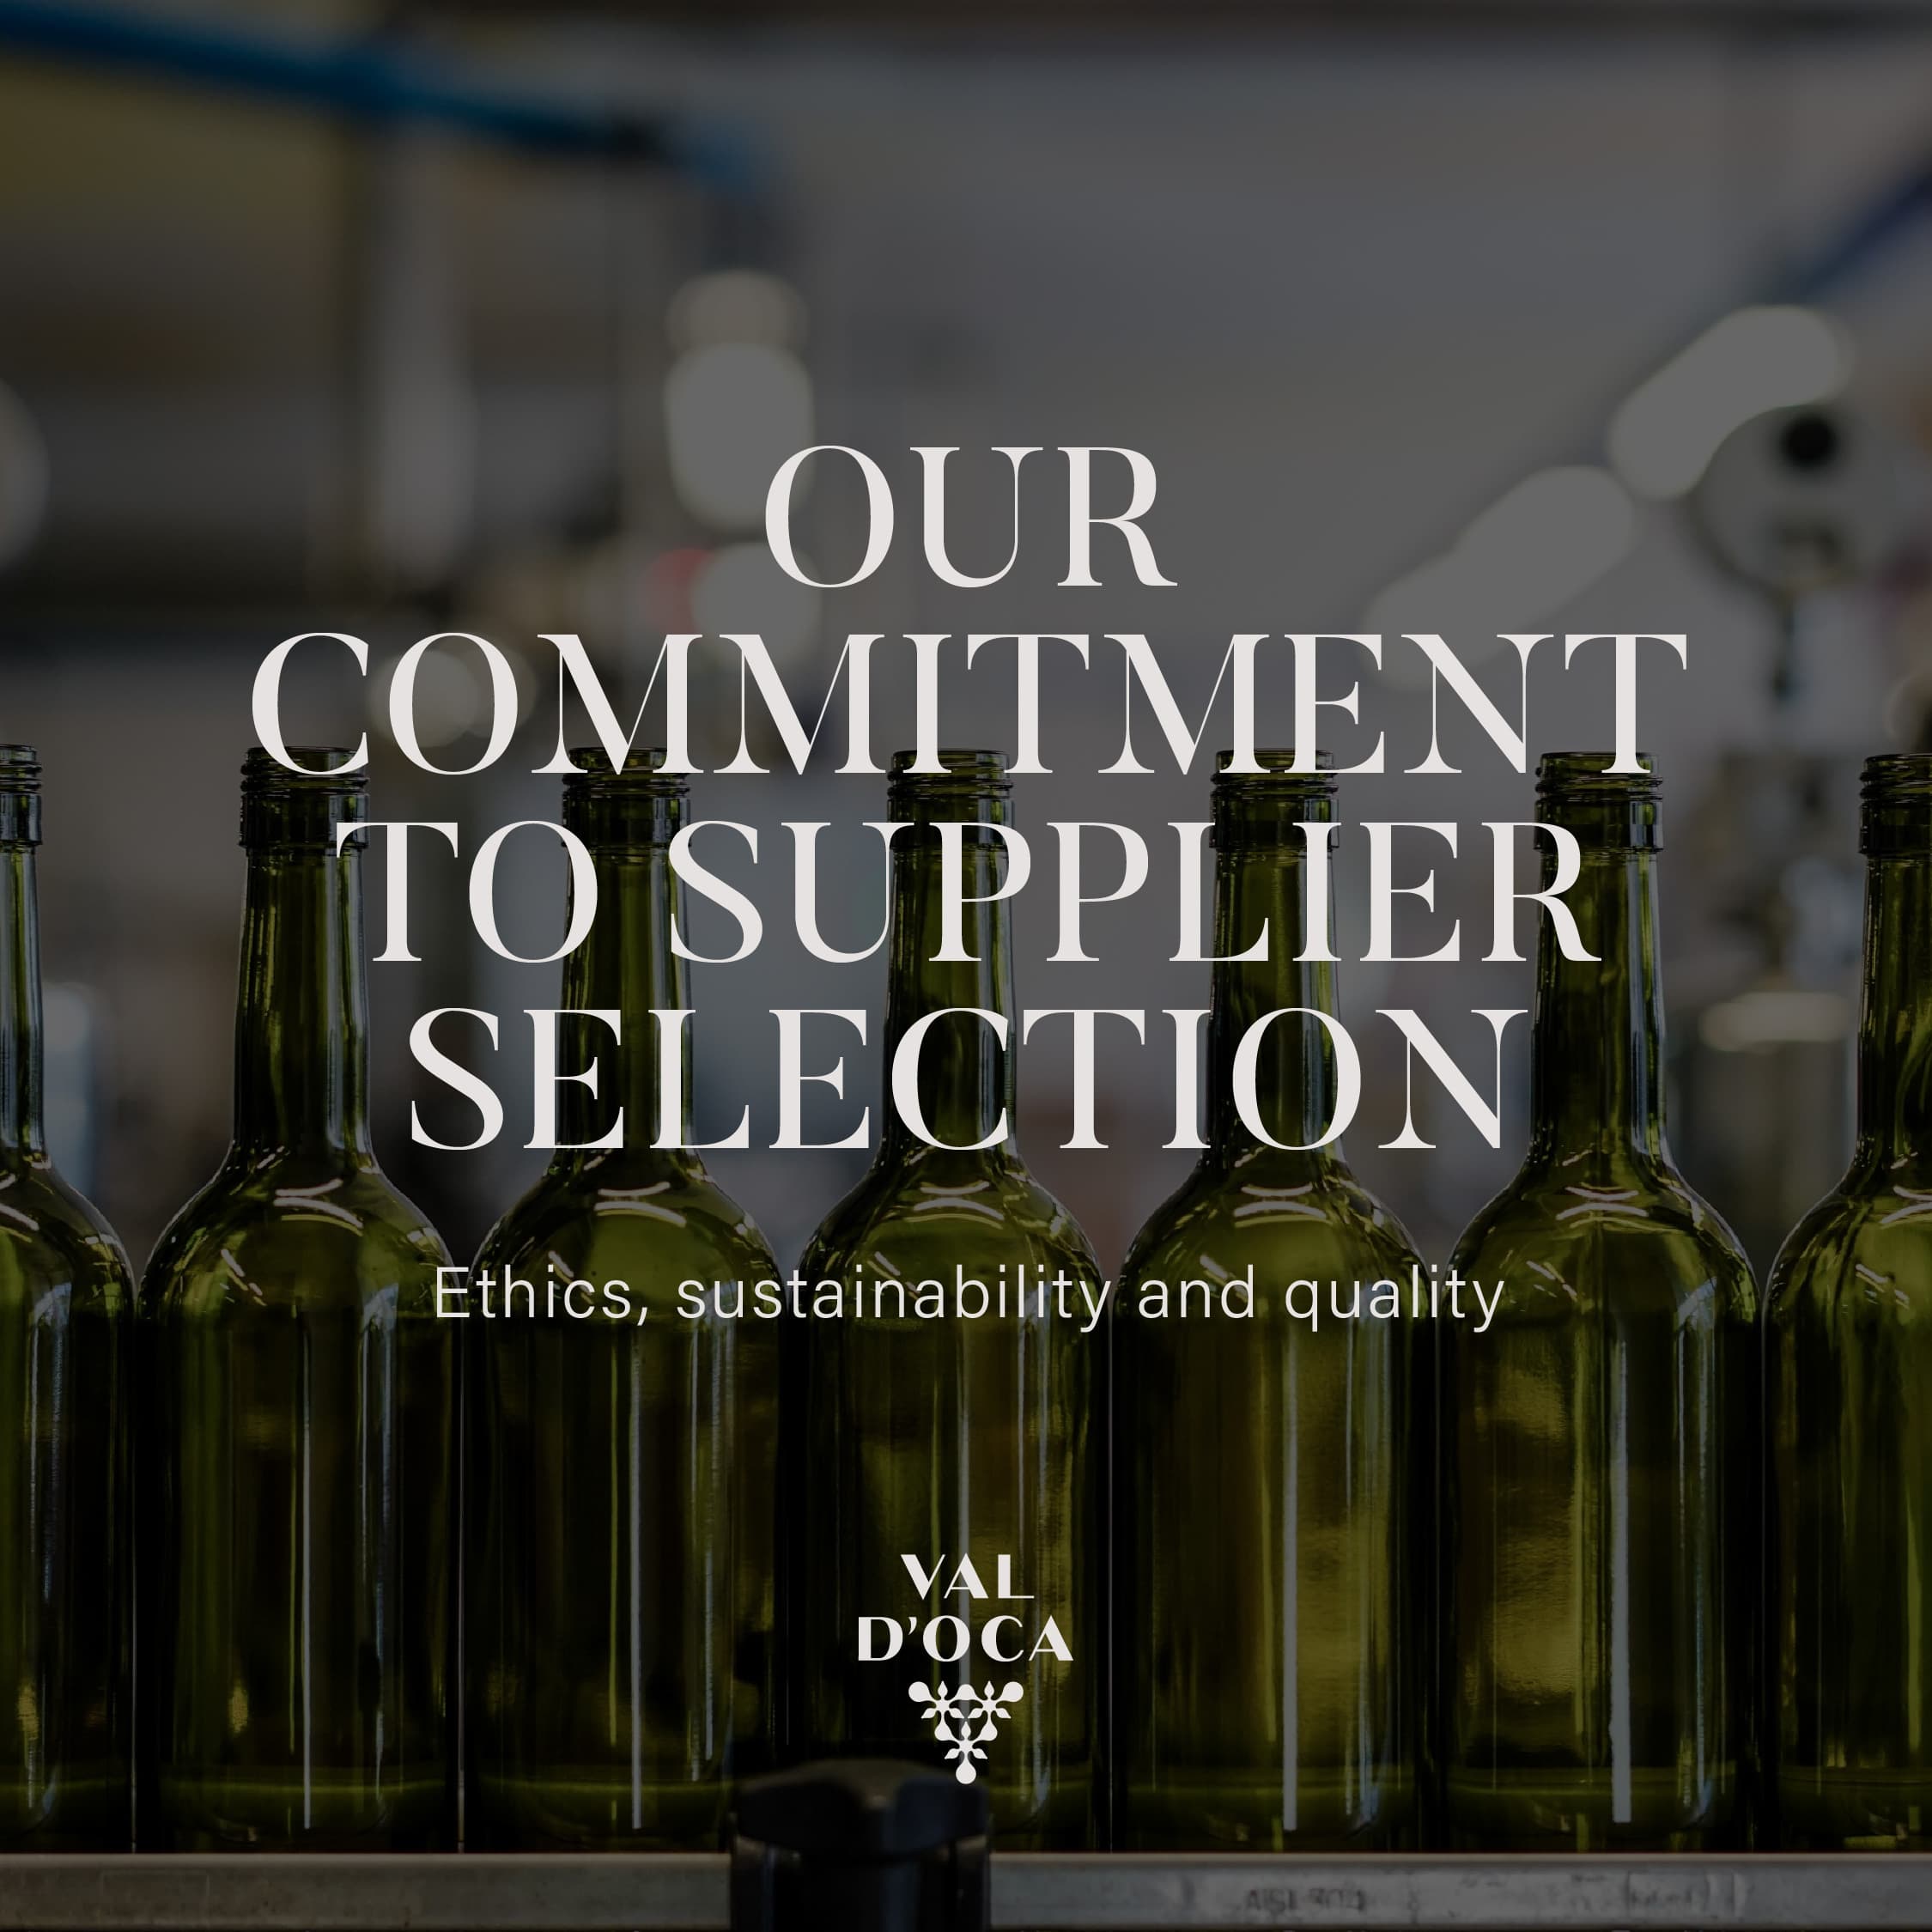 Our commitment to supplier selection